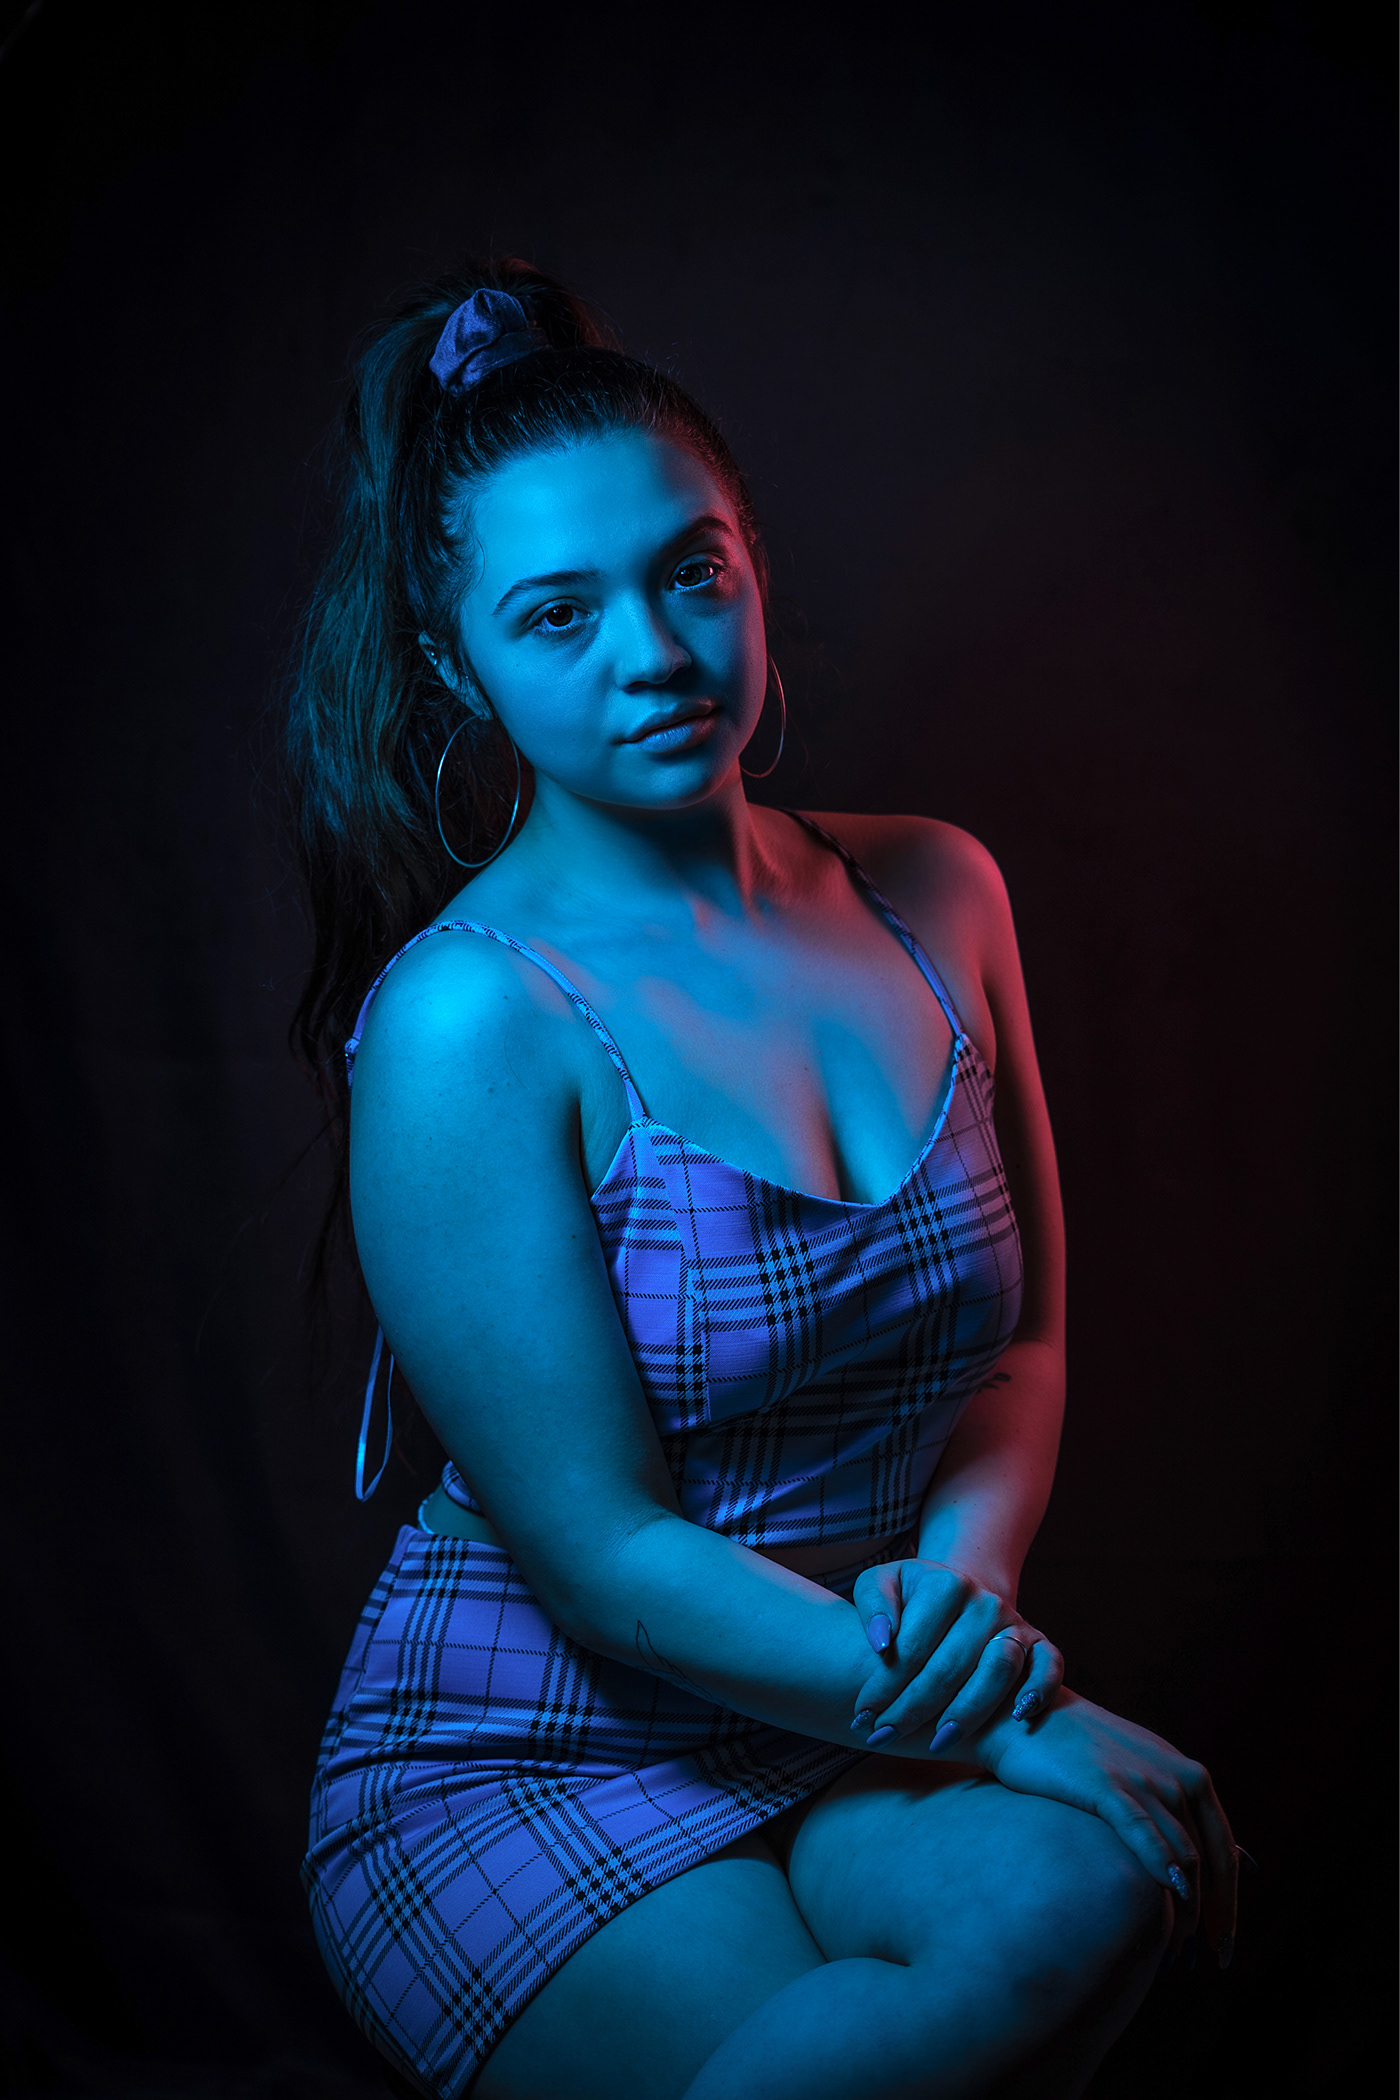 blue bts Canon color demian EOS R6 gels godox Hot lighting model Moody new photoshoot portrait red tejeda